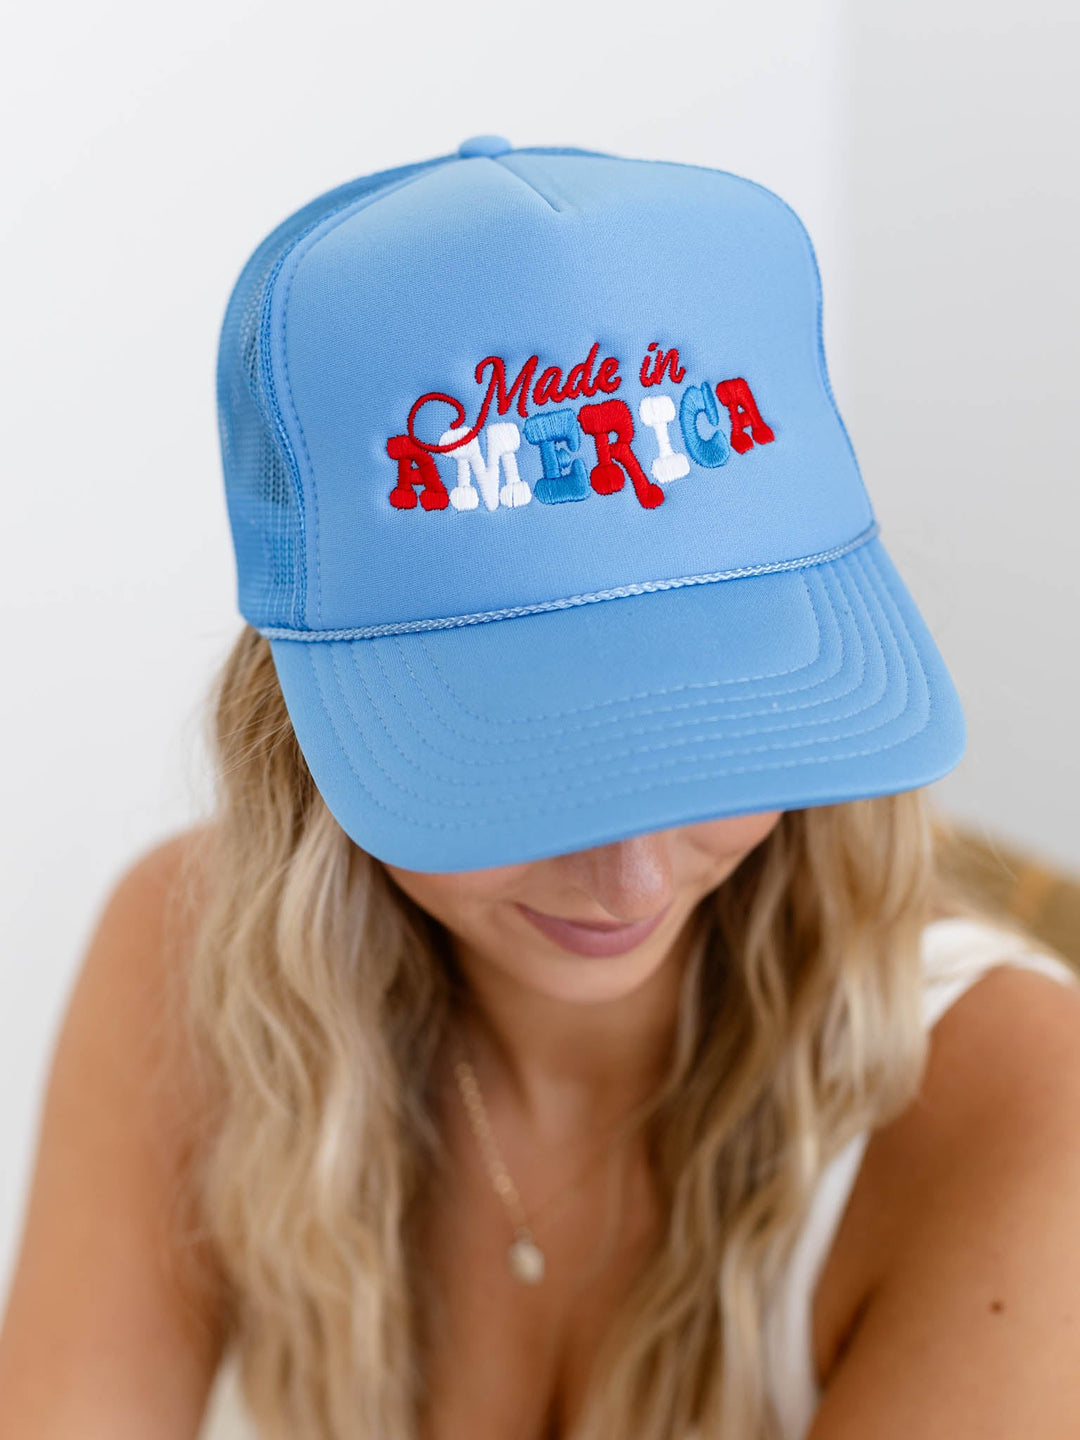 Made In America Trucker HatHats